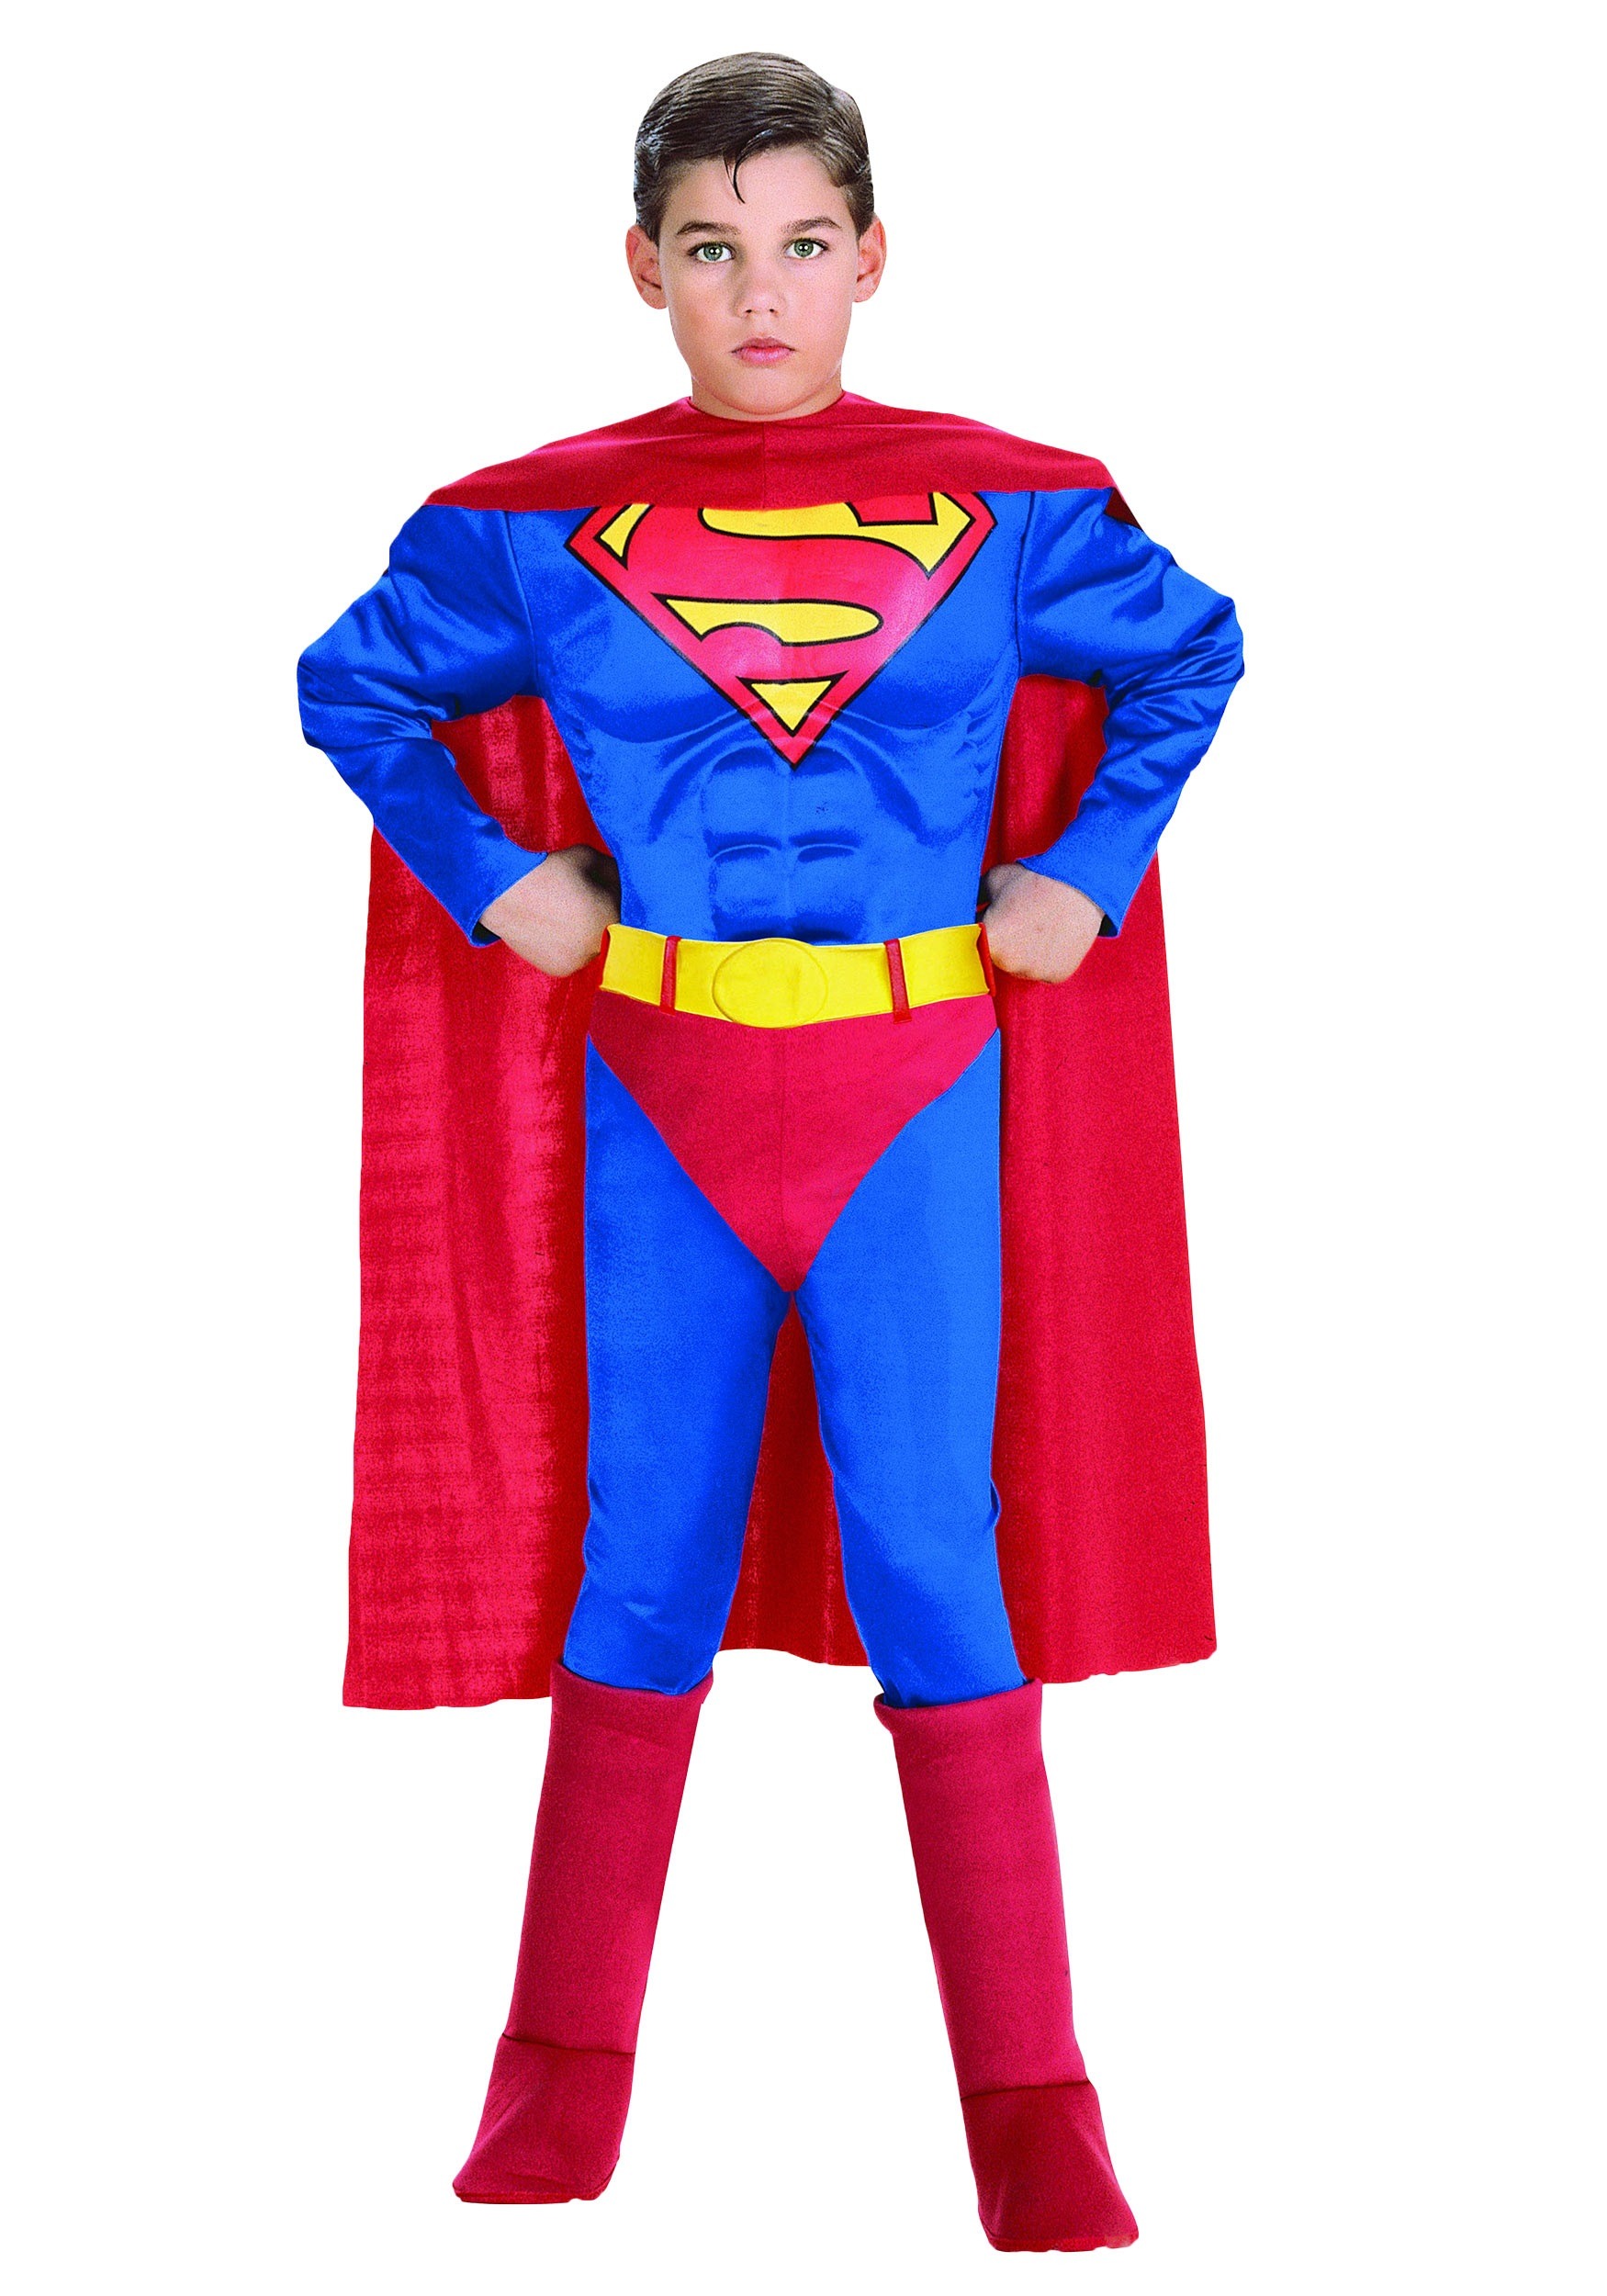 Childrens Deluxe Muscle Superman Costume - Kids Superman Costumes